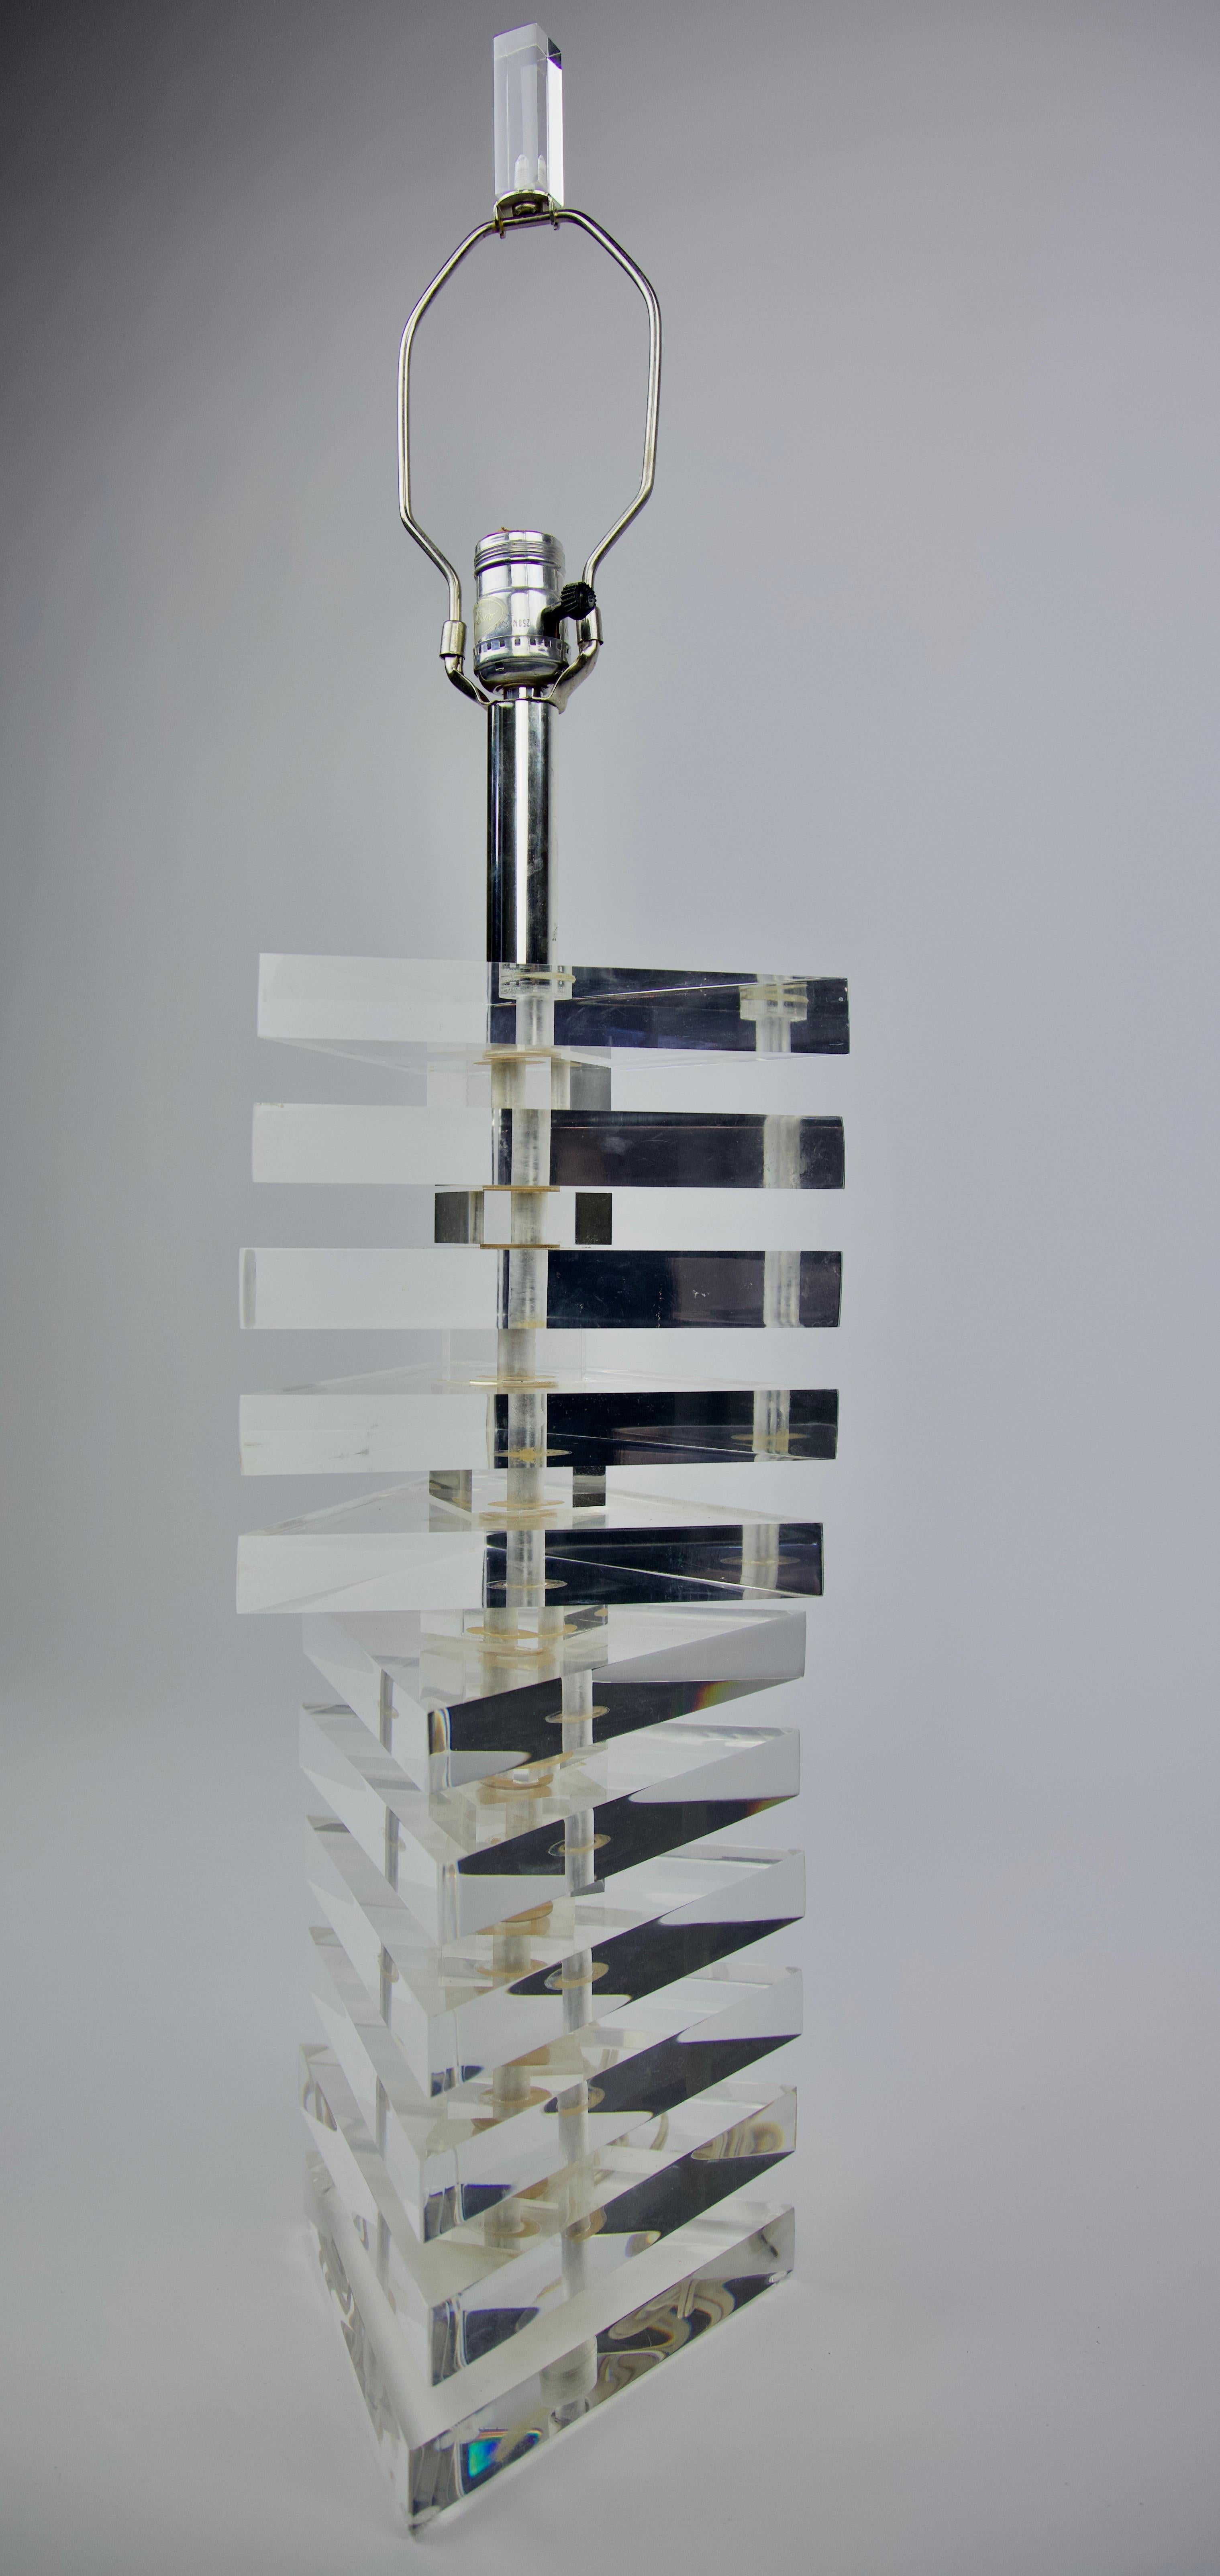 George Bullio, Stacked Triangle Lucite lamp 
with Lucite finial in the manner of Karl Springer. Three-way switch. Shade not included.
Architectural 1